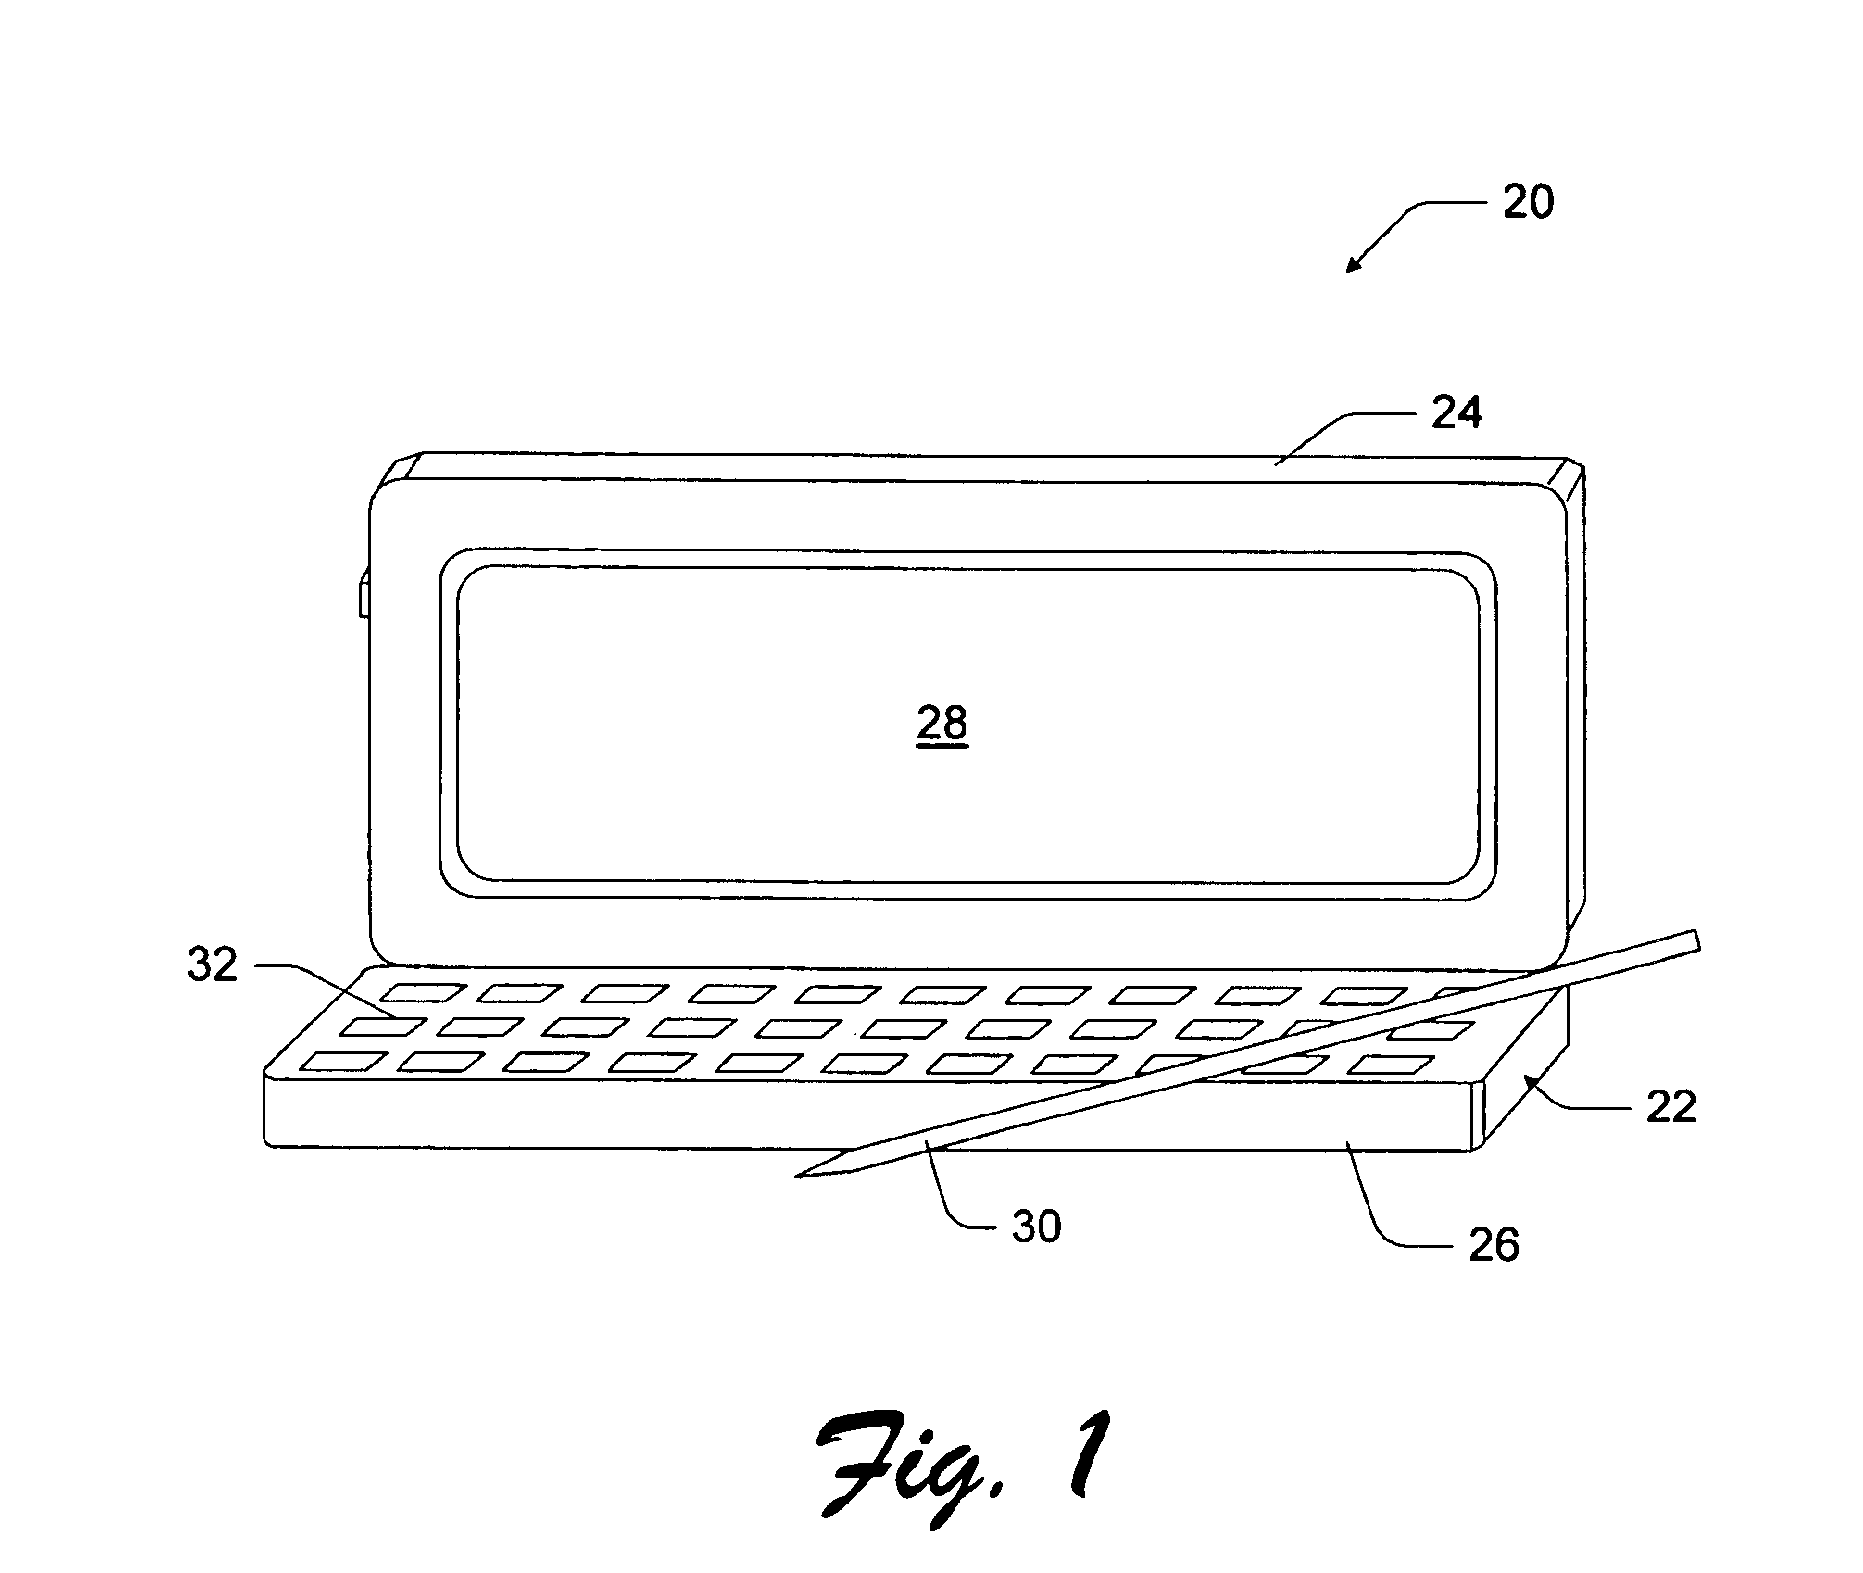 Controlling memory usage in systems having limited physical memory